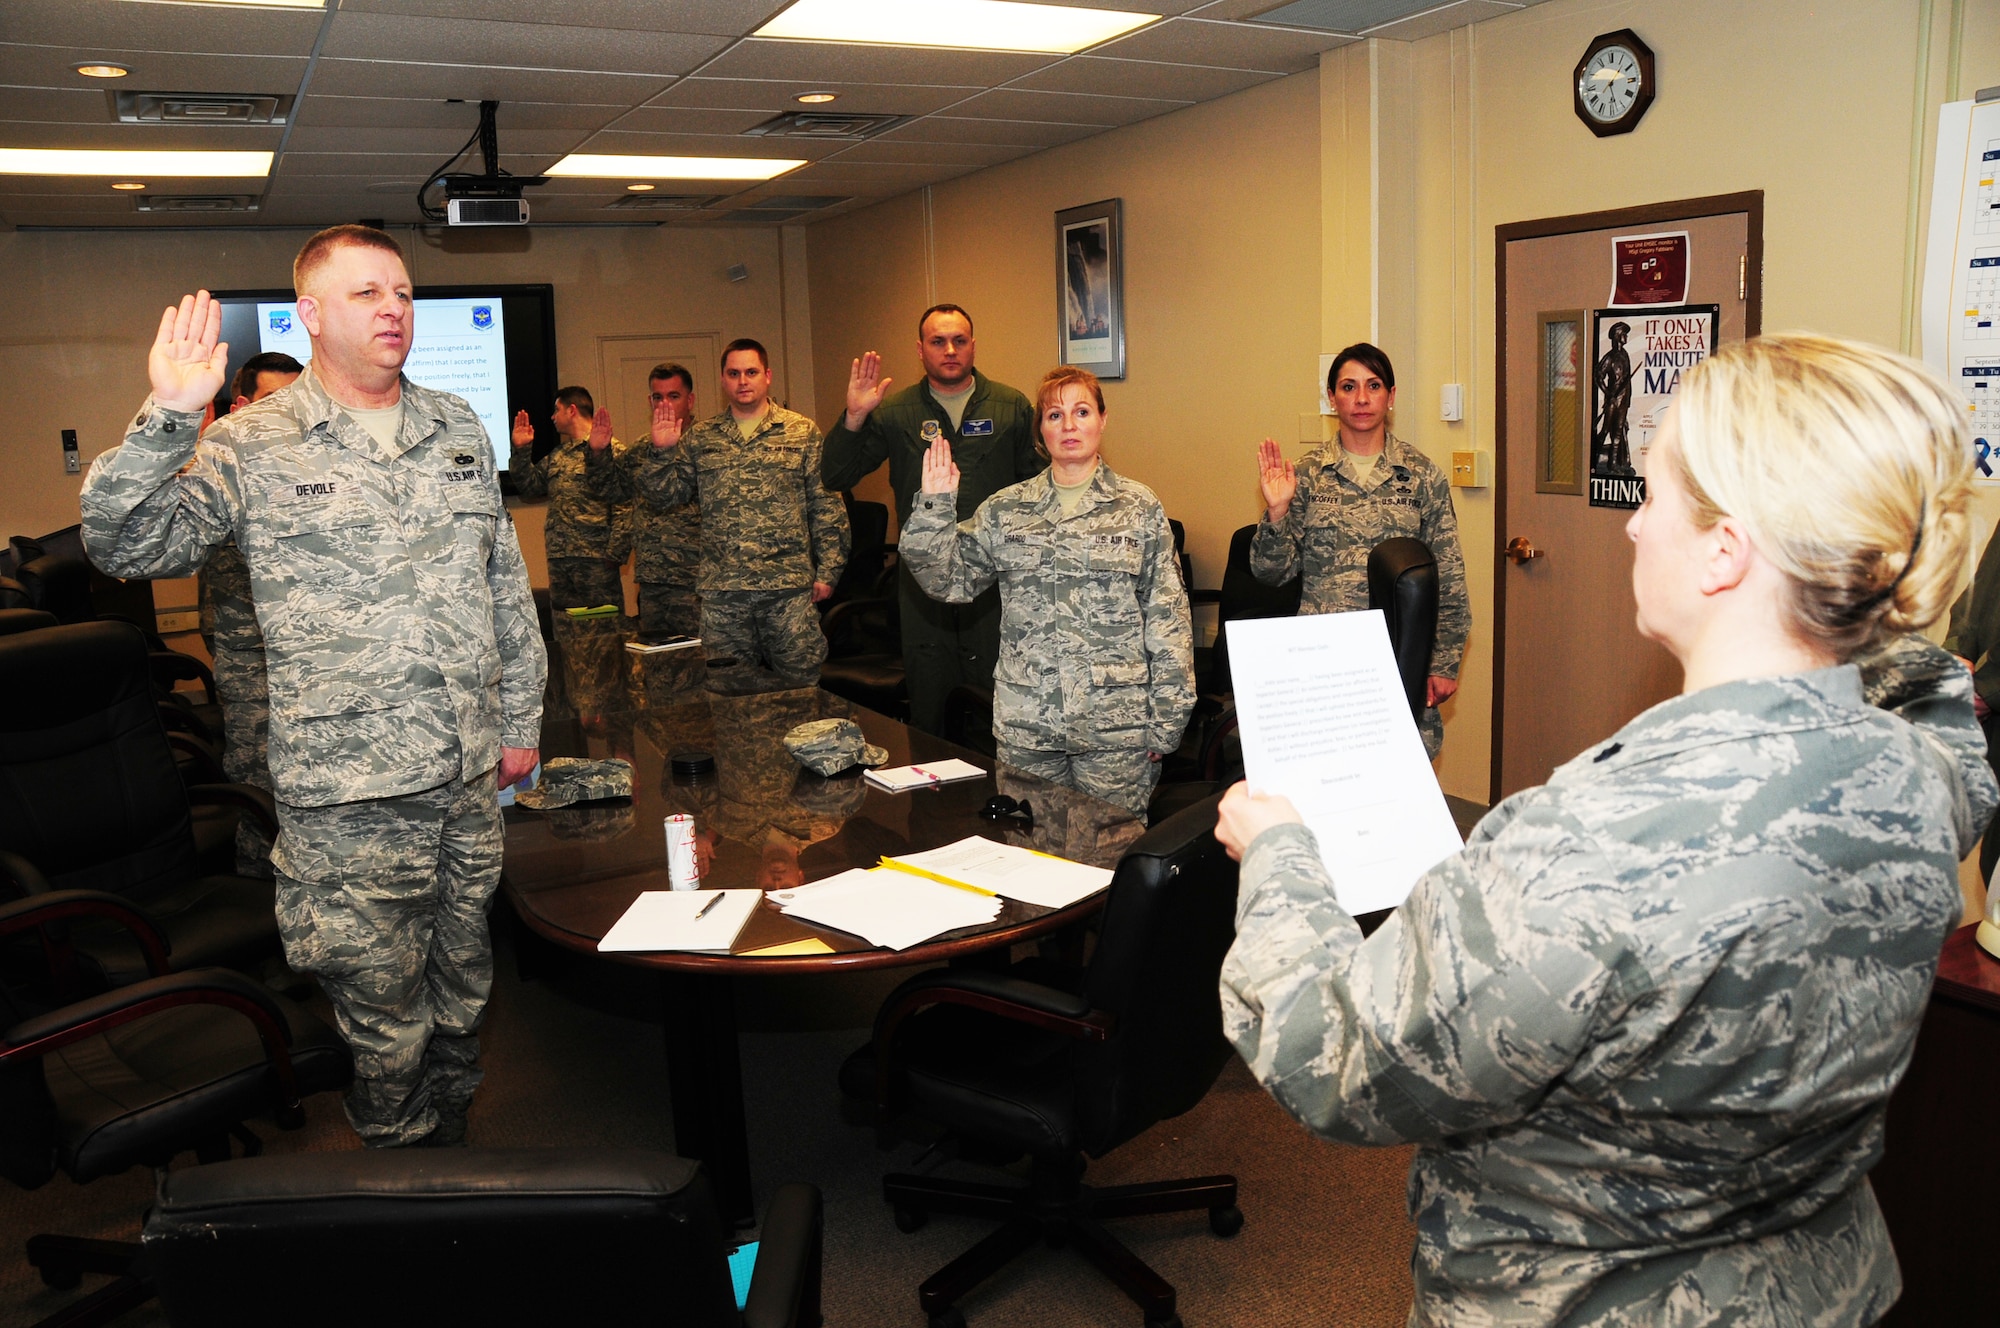 Lt. Col. Jennifer Post, 107th Inspector General, swears in members of the 107th Airlift Wing as the new Wing Inspection Team at the Niagara Falls Reserve Station on April 13, 2014. (U.S. Air National Guard Photo/Senior Master Sgt. Ray Lloyd)